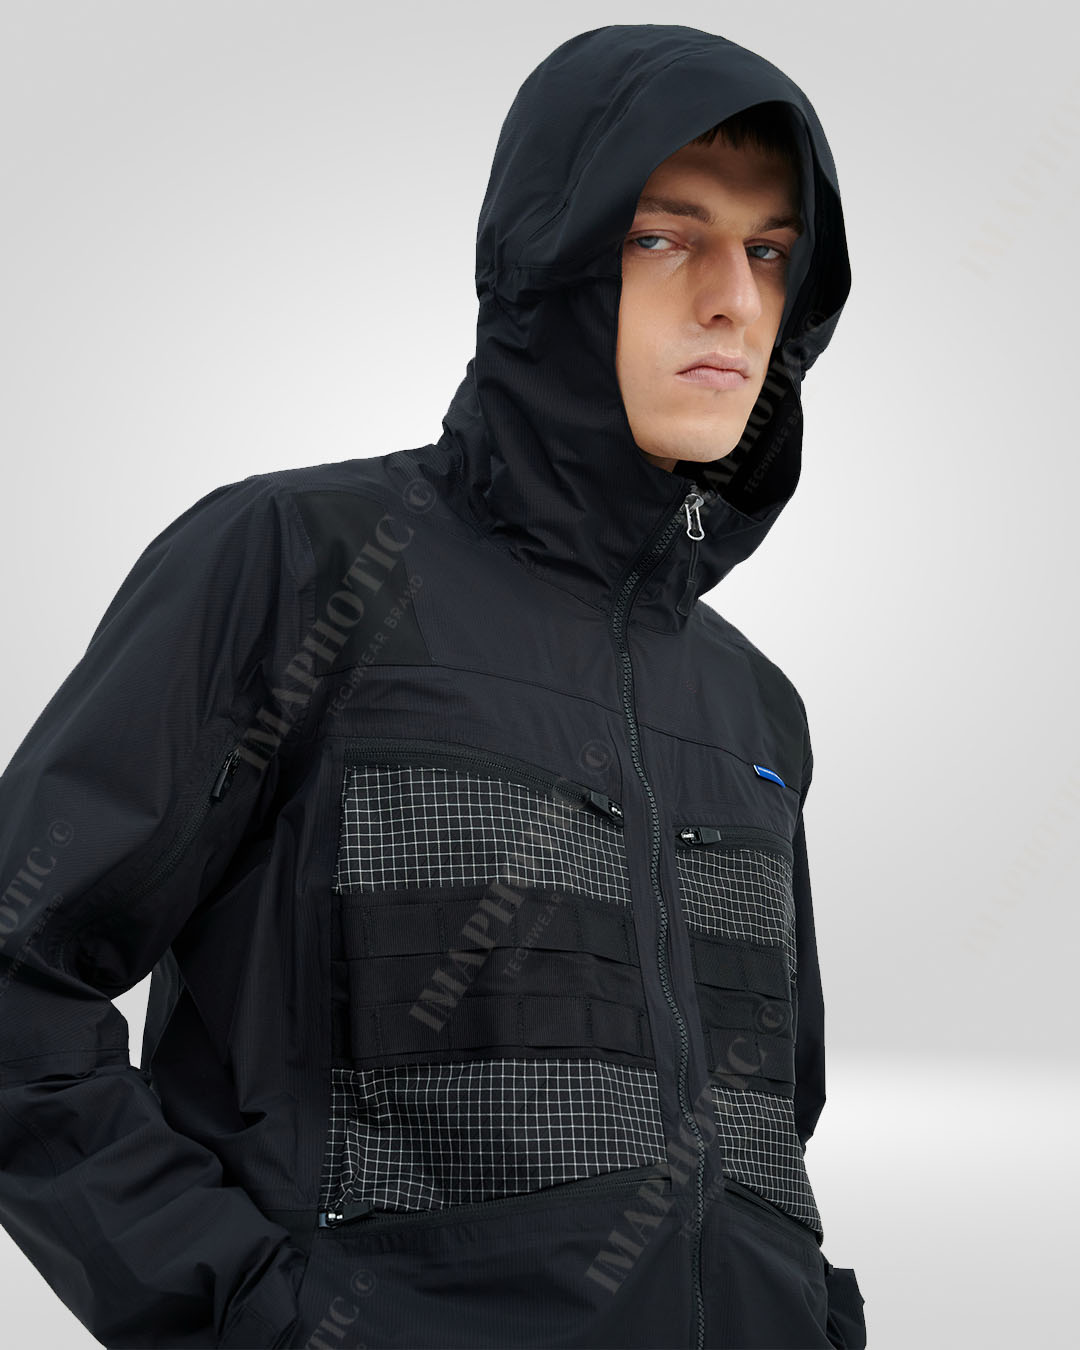 Adventurer\'s Hooded Outdoor Jacket - Defy the Elements in Style – Imaphotic